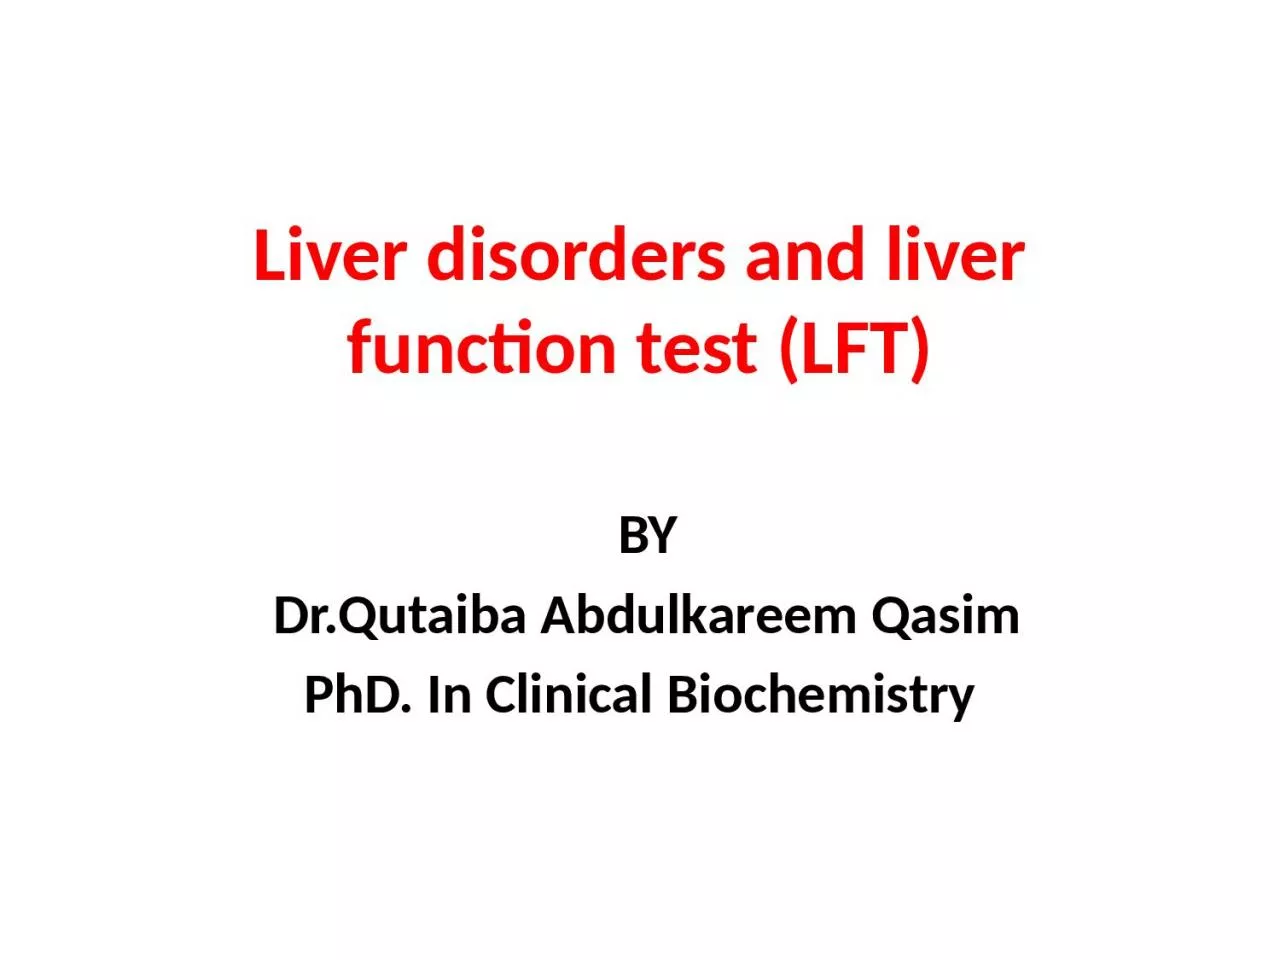 Liver disorders and liver function test (LFT)